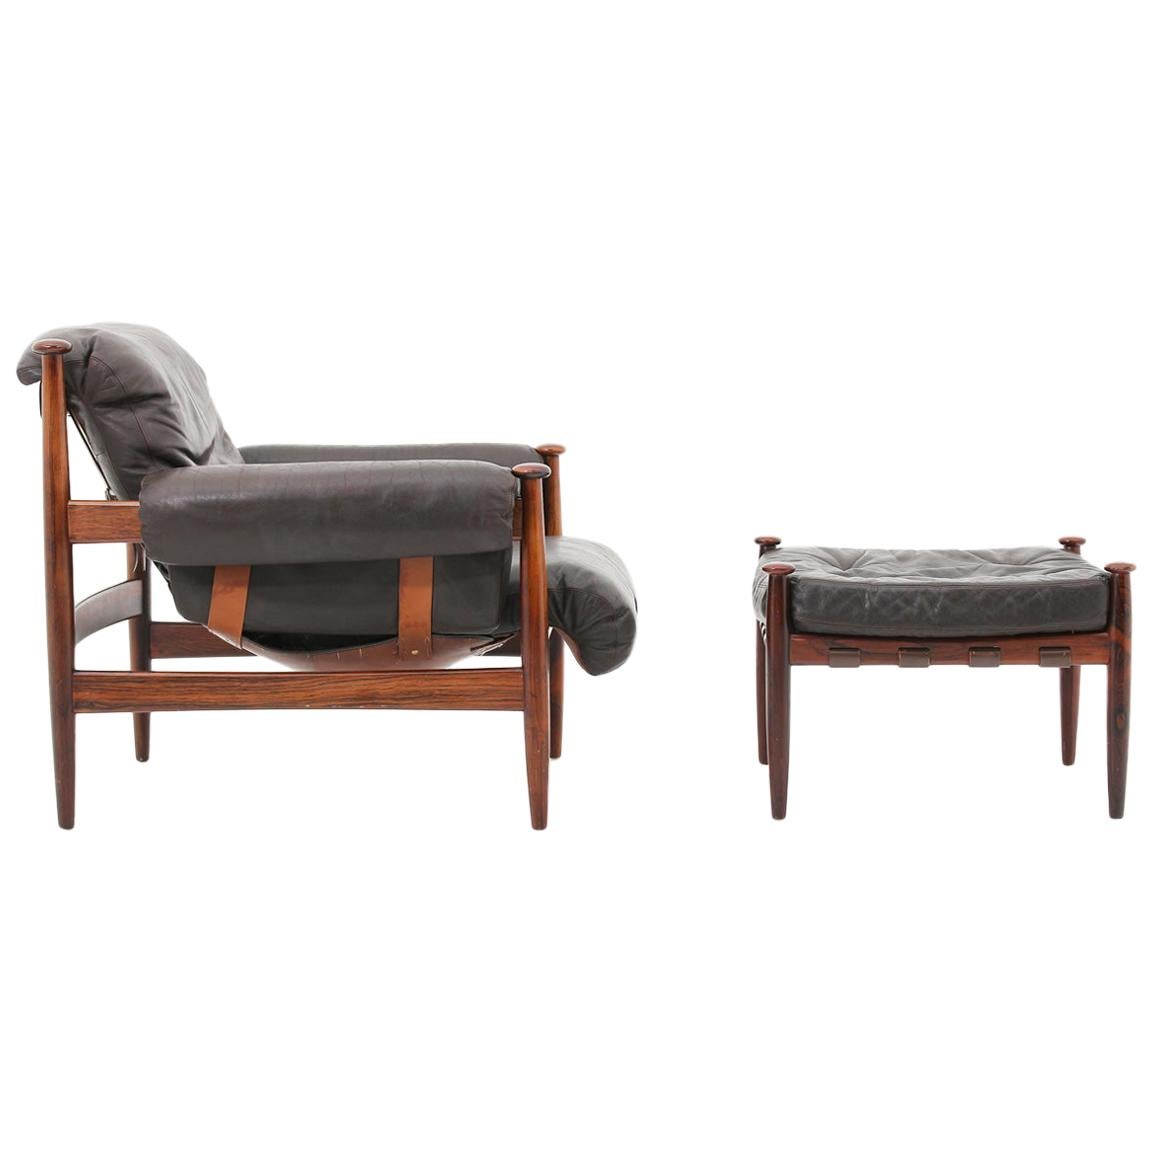 Scandinavian Leather and Rosewood Lounge Chair "Amiral" by Eric Merthen